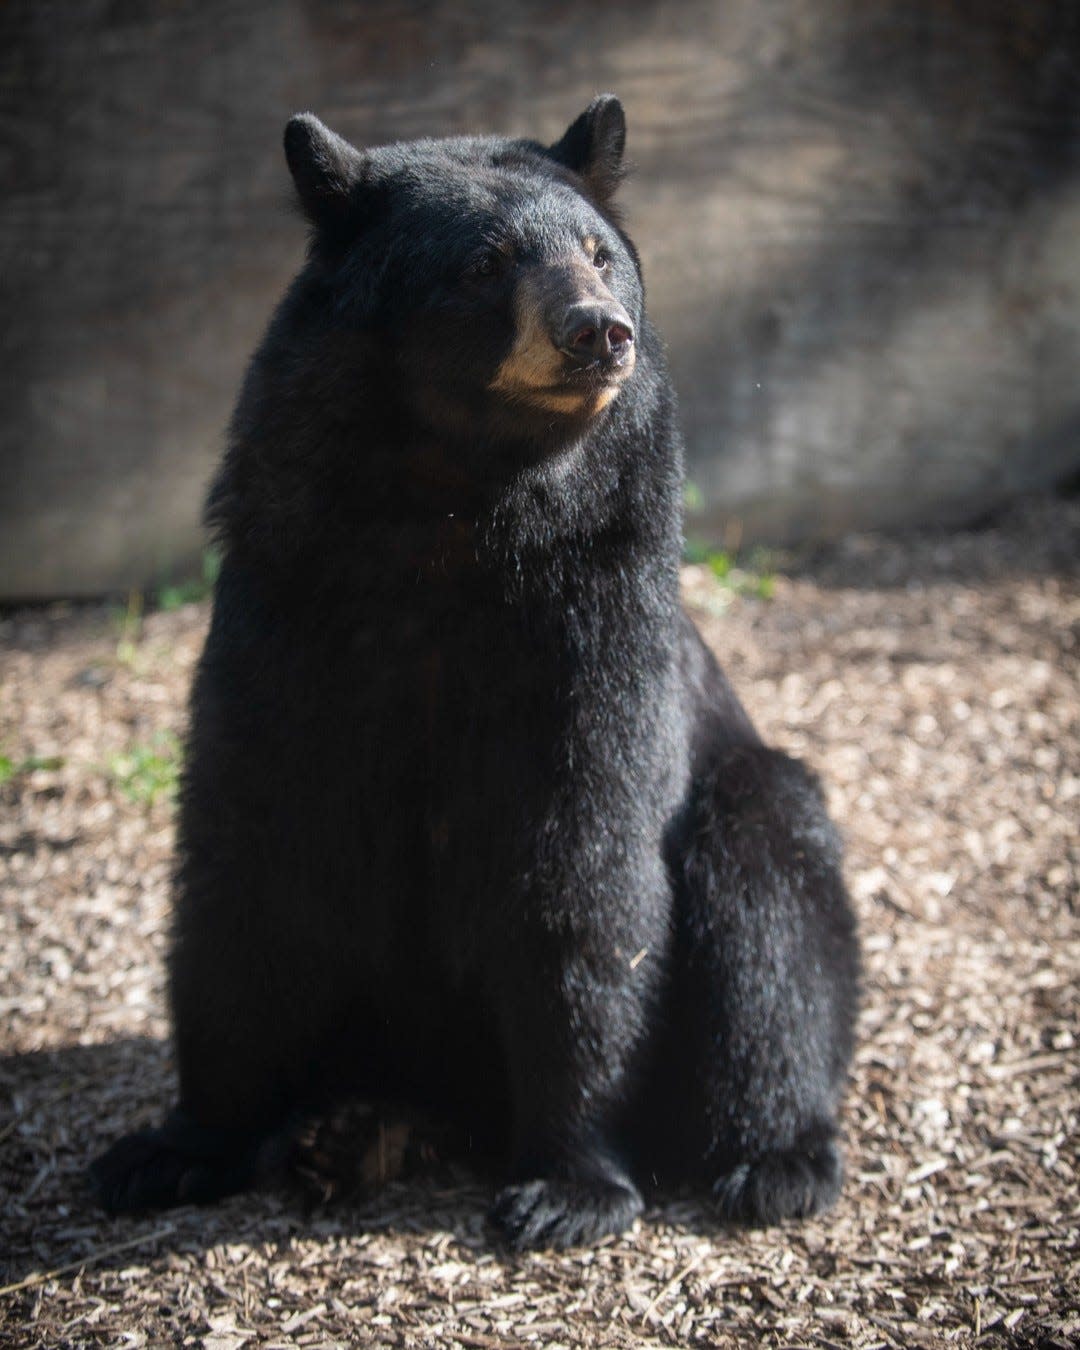 The Columbus Zoo and Aquarium had to euthanize Joan, a black bear, after they found she was unable to use her back legs, according to a statement Friday on its Facebook page.